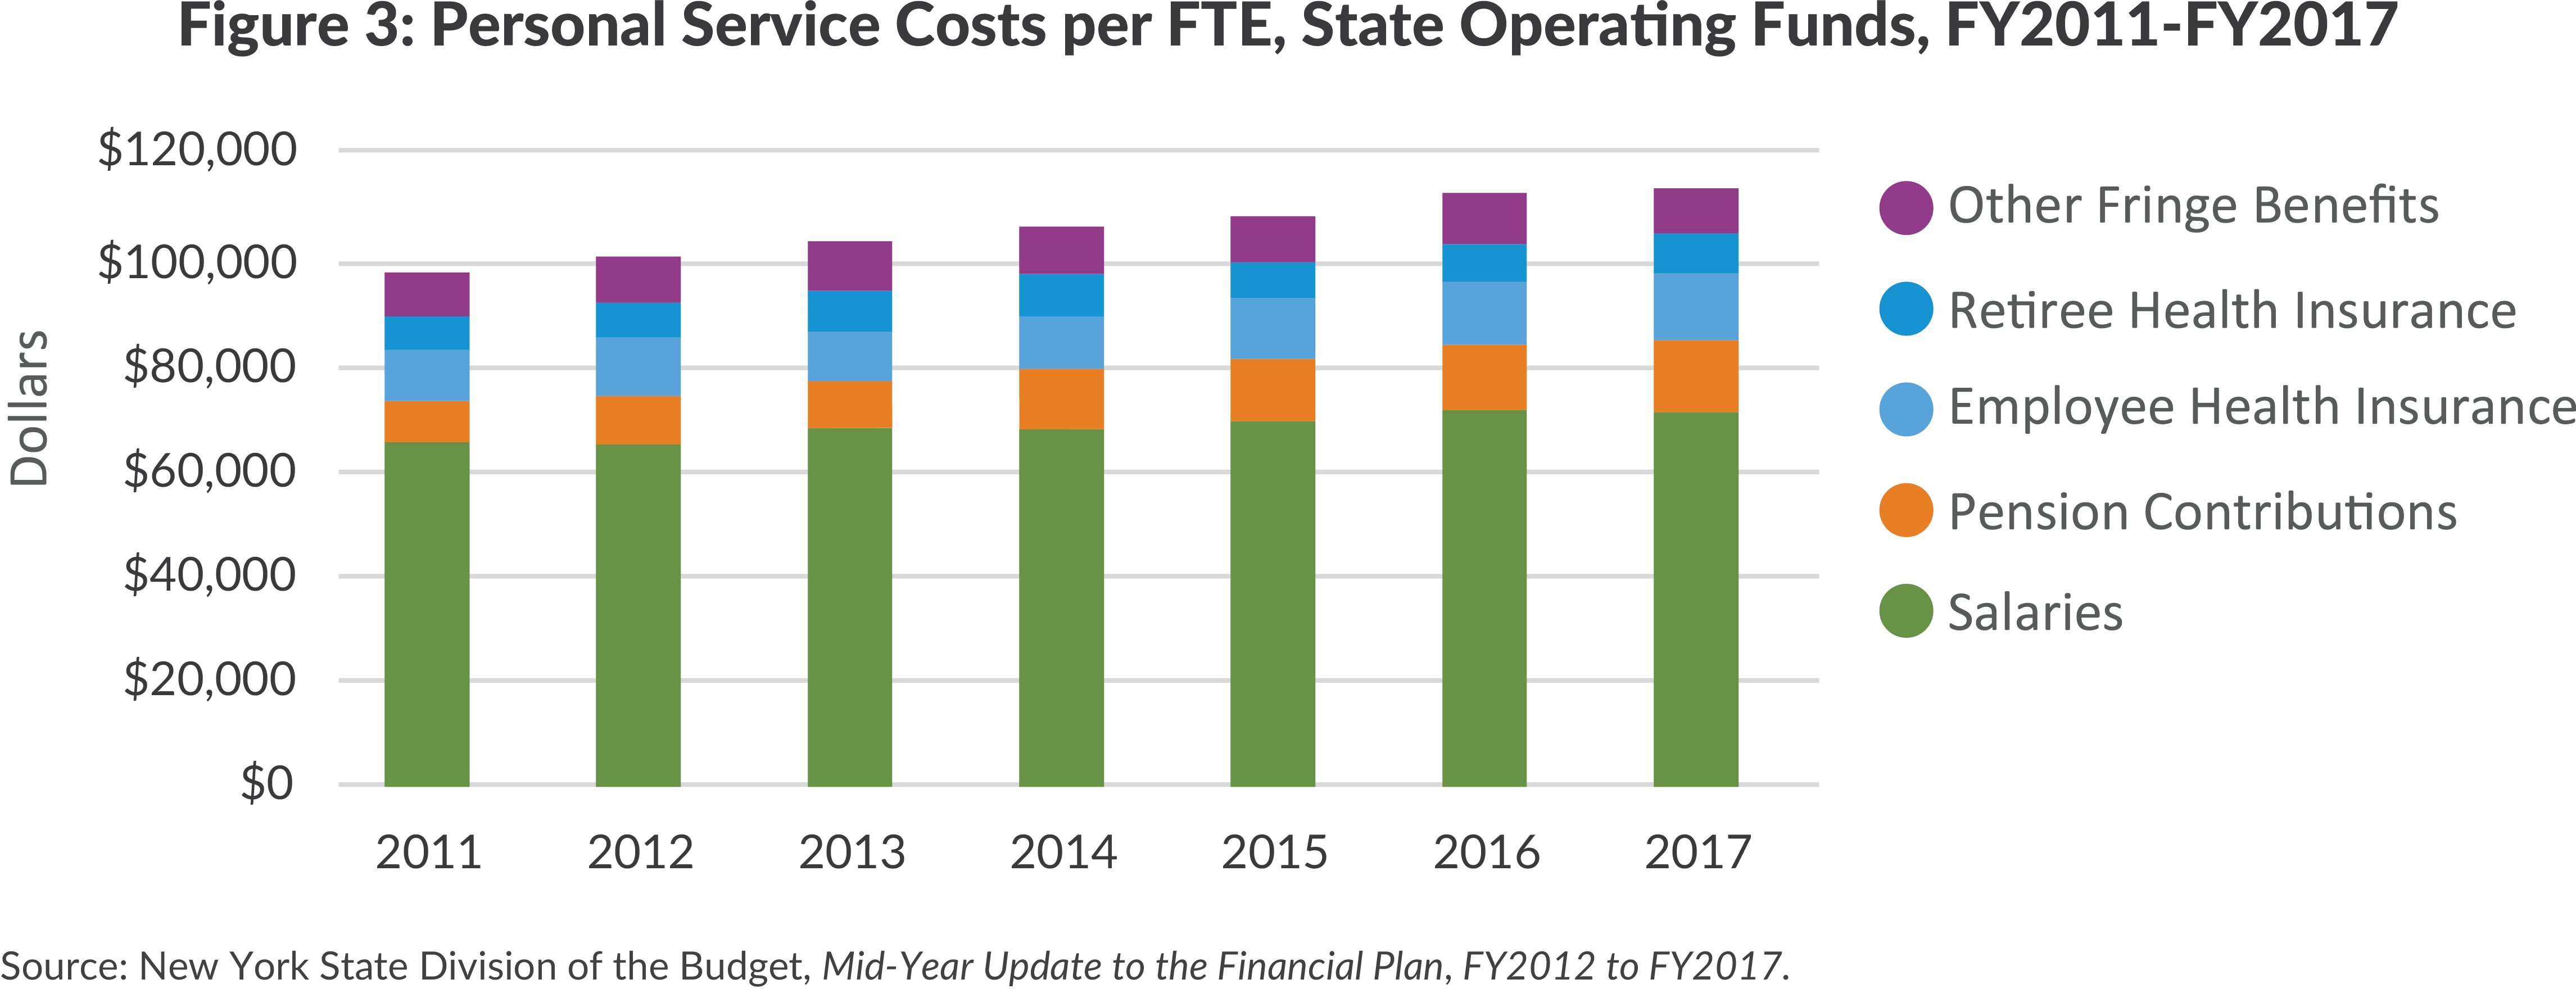 Figure 3: Personal Service Costs per FTE, State Operating Funds, FY2011-FY2017